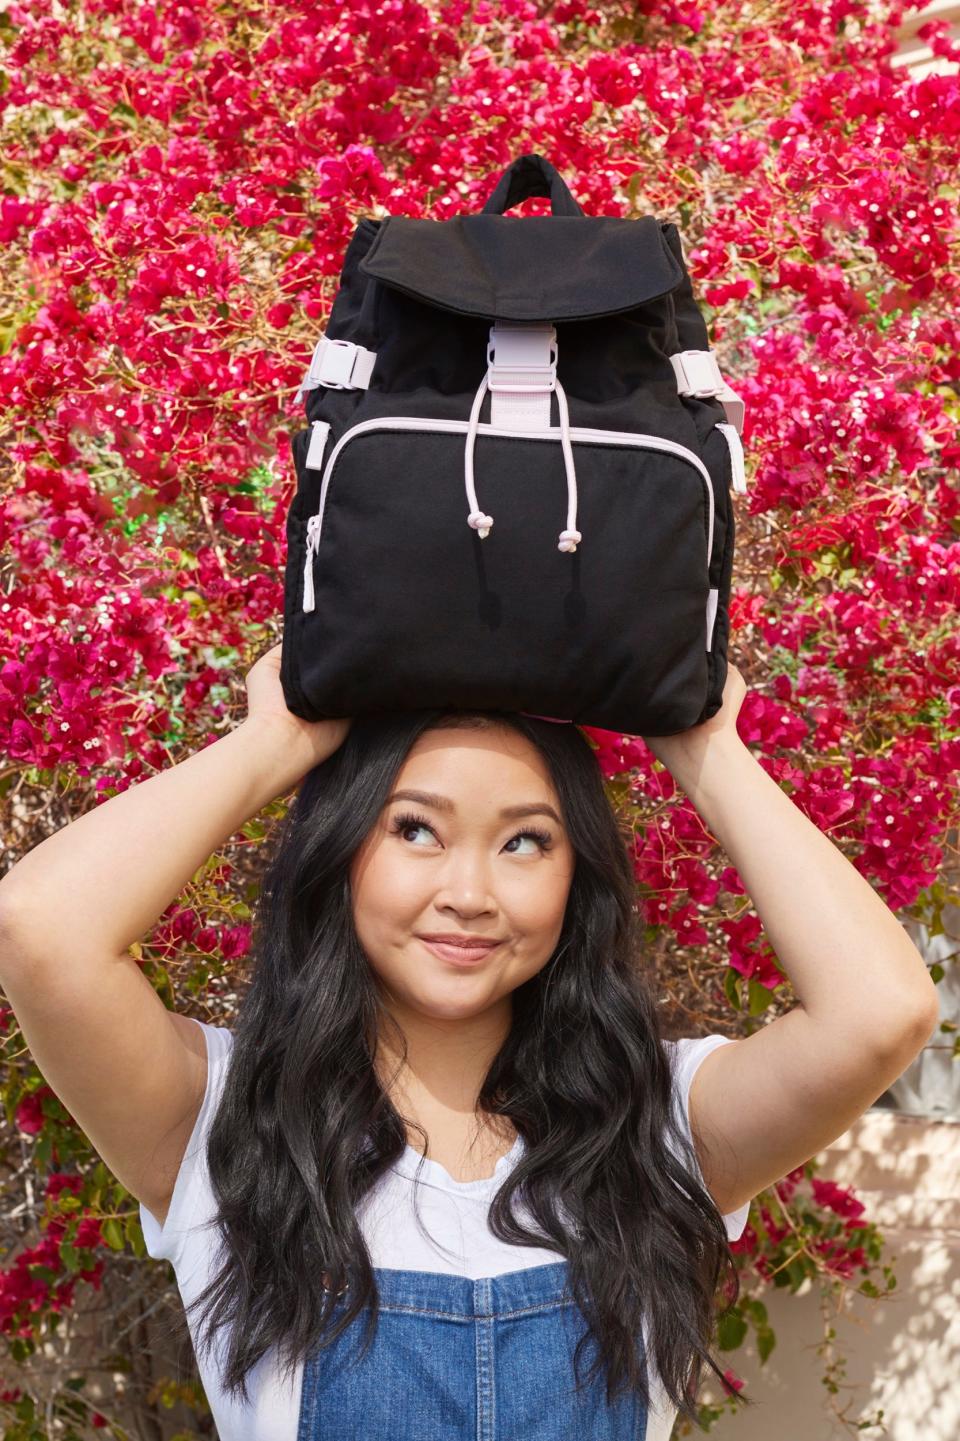 Lana Condor posing with the Lana Utility Backpack that she designed as part of her collaboration with Vera Bradley.